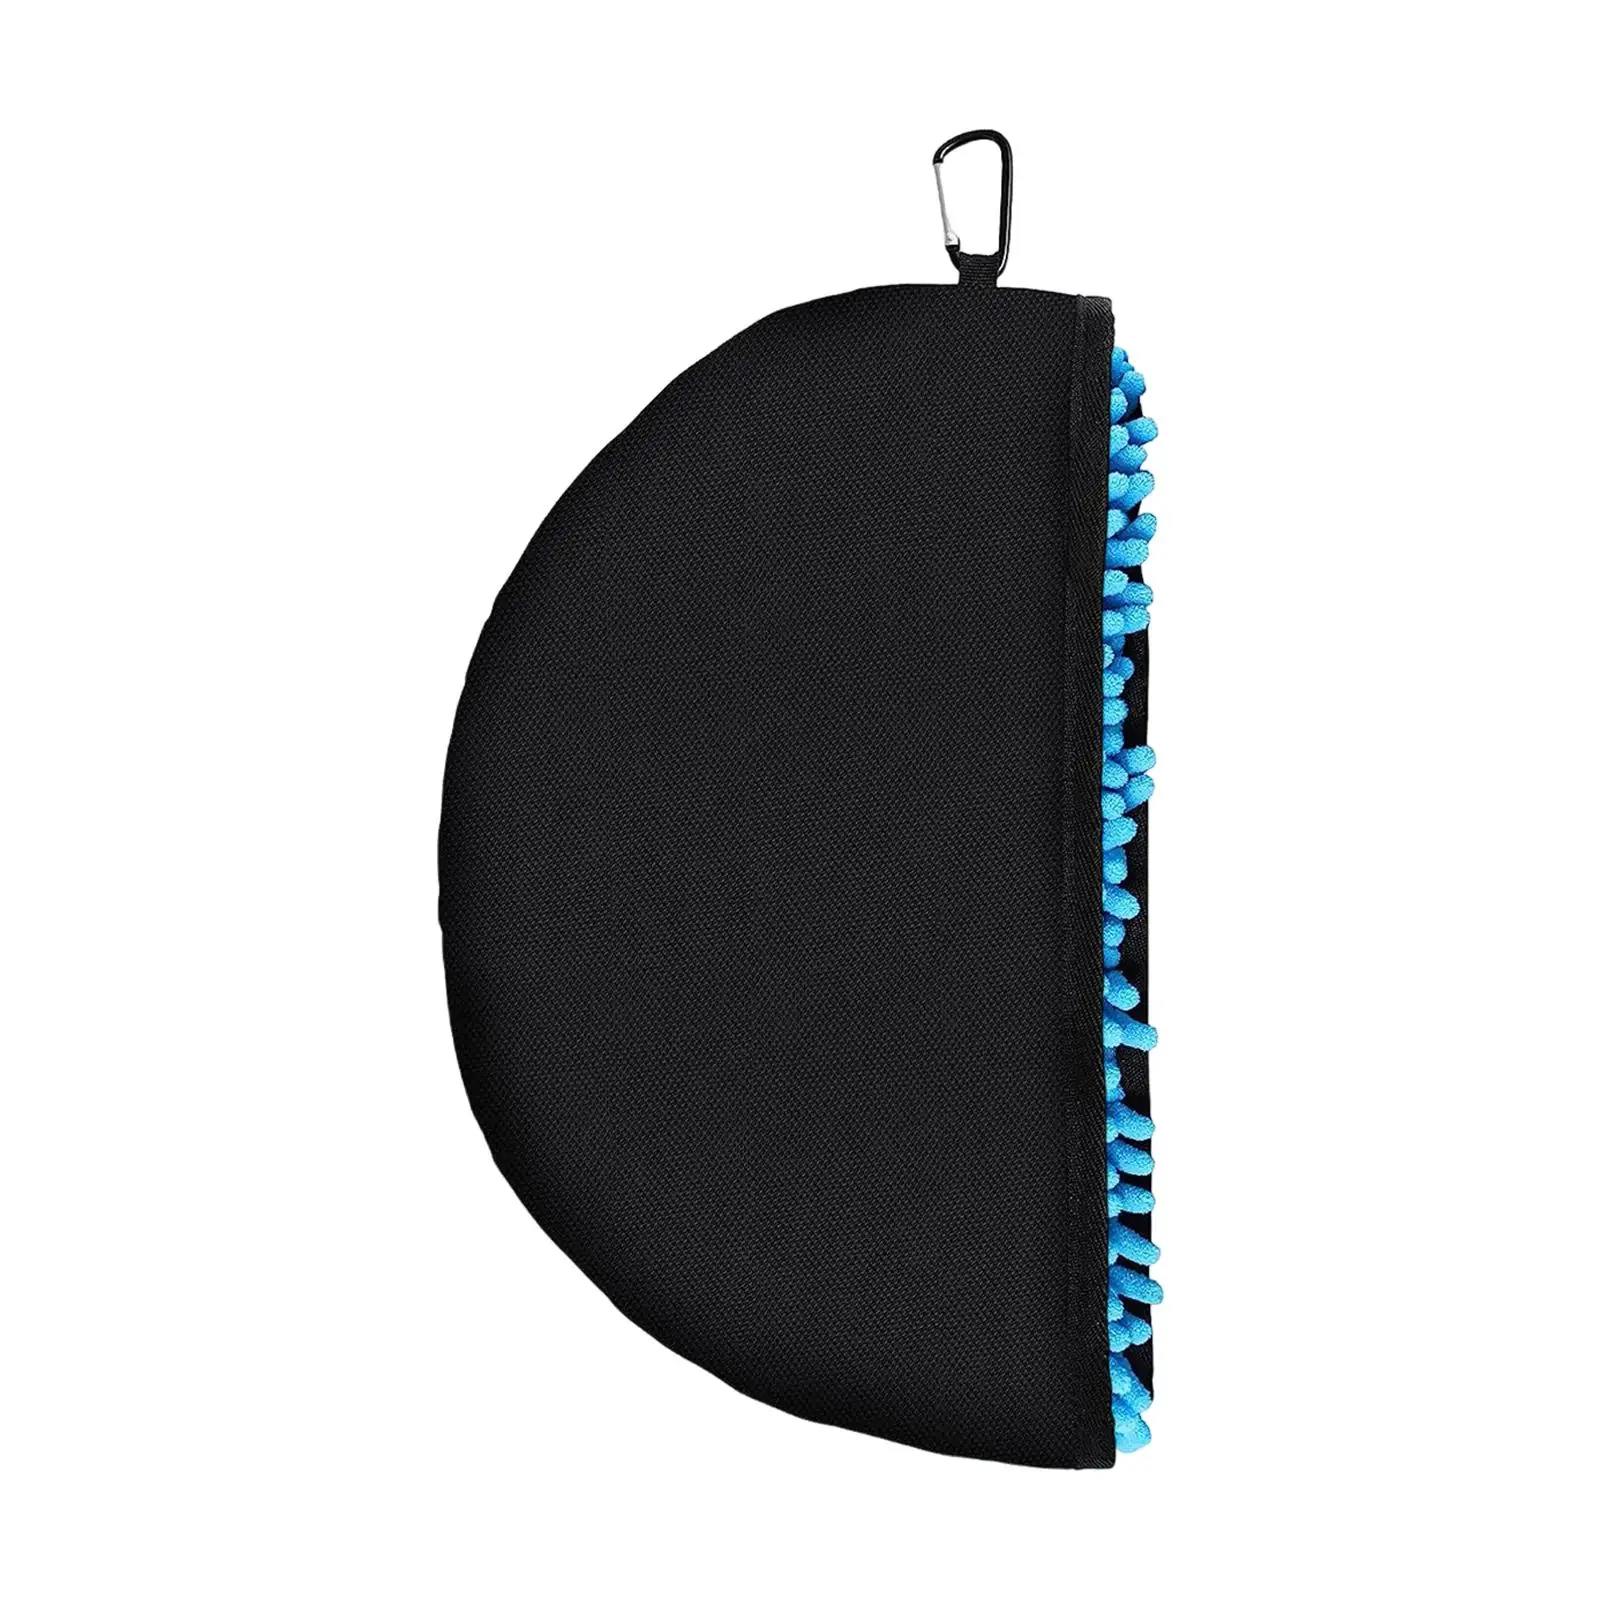 Disc Golf Cleaning Tool Portable Heavy Duty Easy to Clean Golf Accessories Cleaning Towel Cover for Golf Course Sports Travel